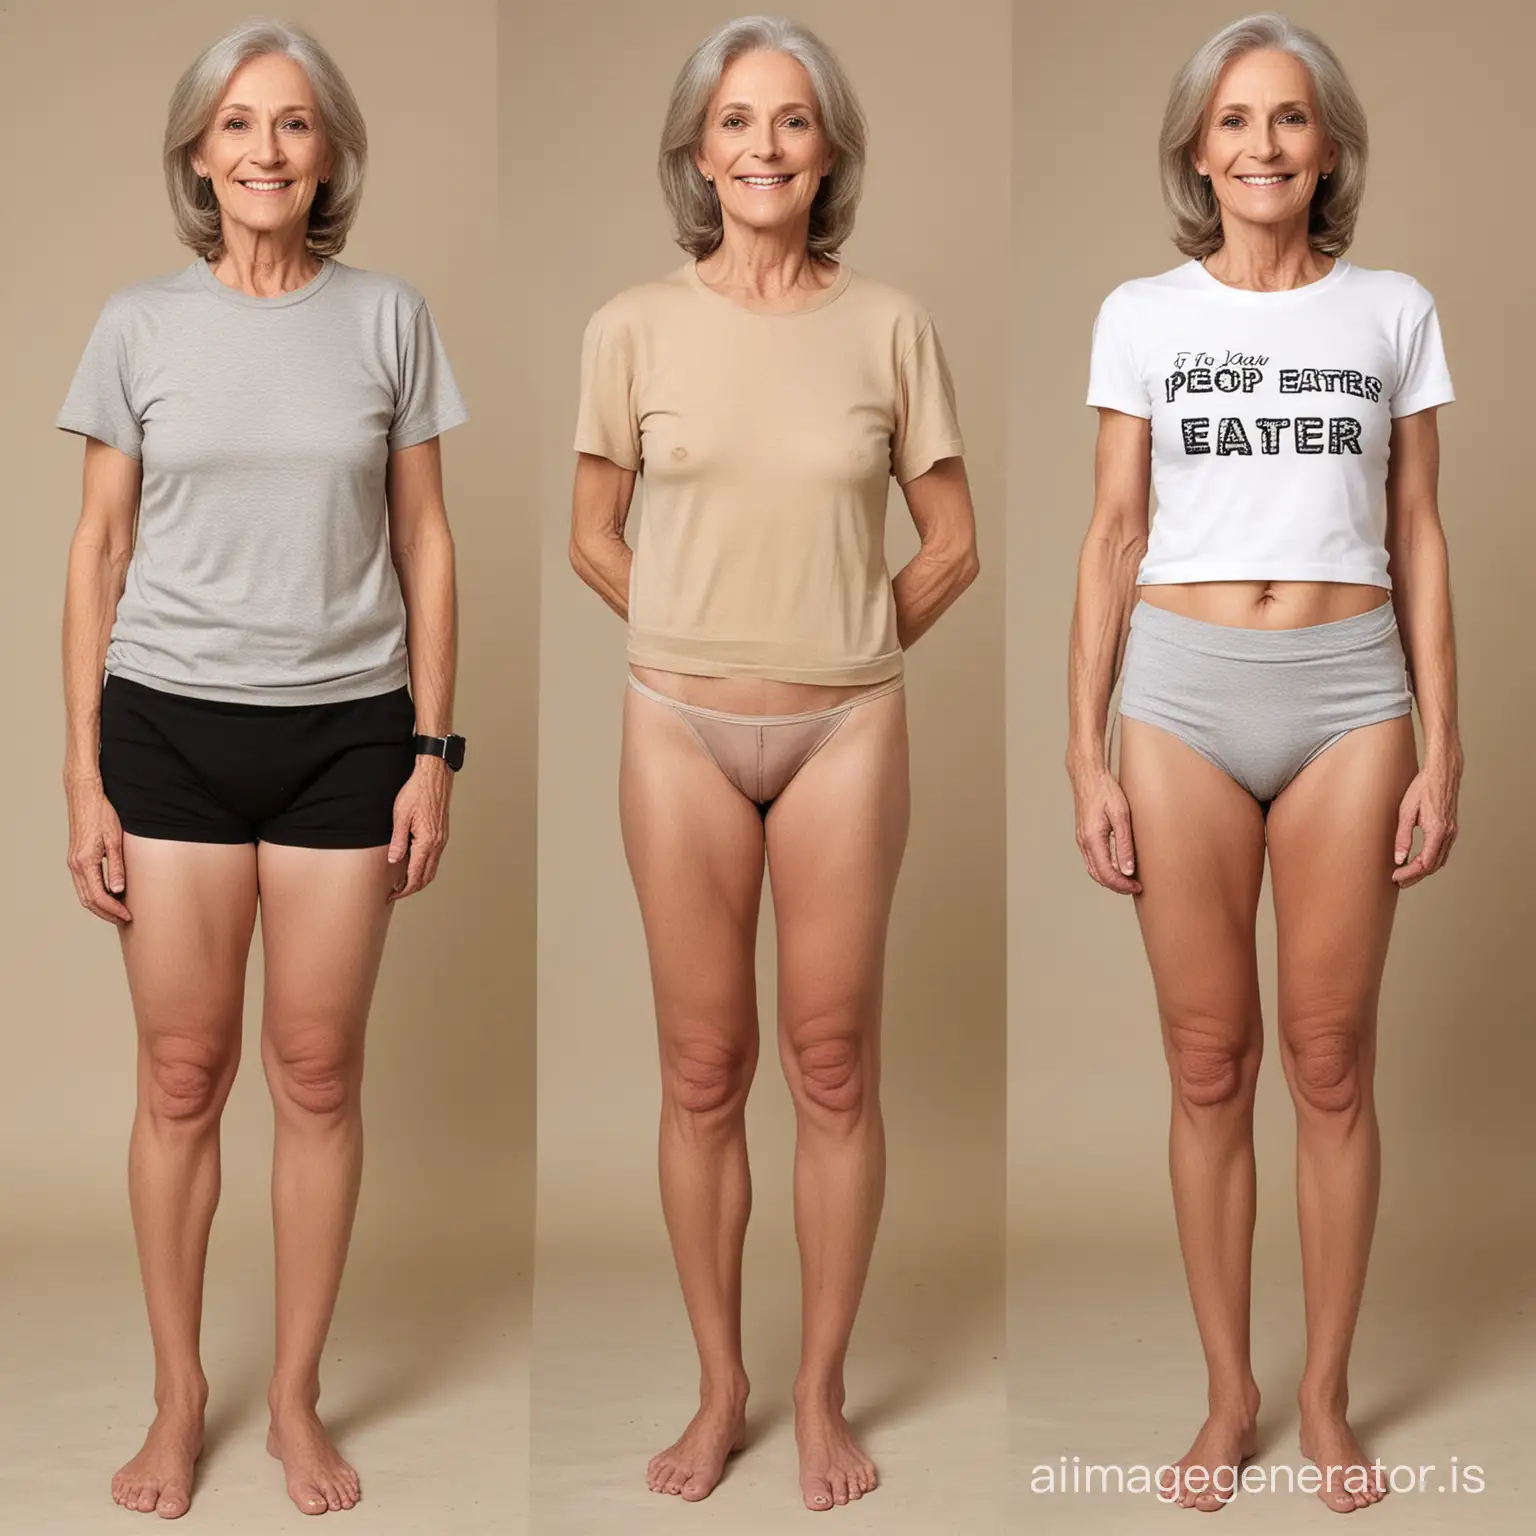 Before & after comparison of: 70 year old transgender teacher, smiling, weak, frail, anorexic, emaciated, flat-chested, extremely skinny waist, very wide hips, small legs, thin arms, nude, wearing a t-shirt with the text: "Poop Eater"